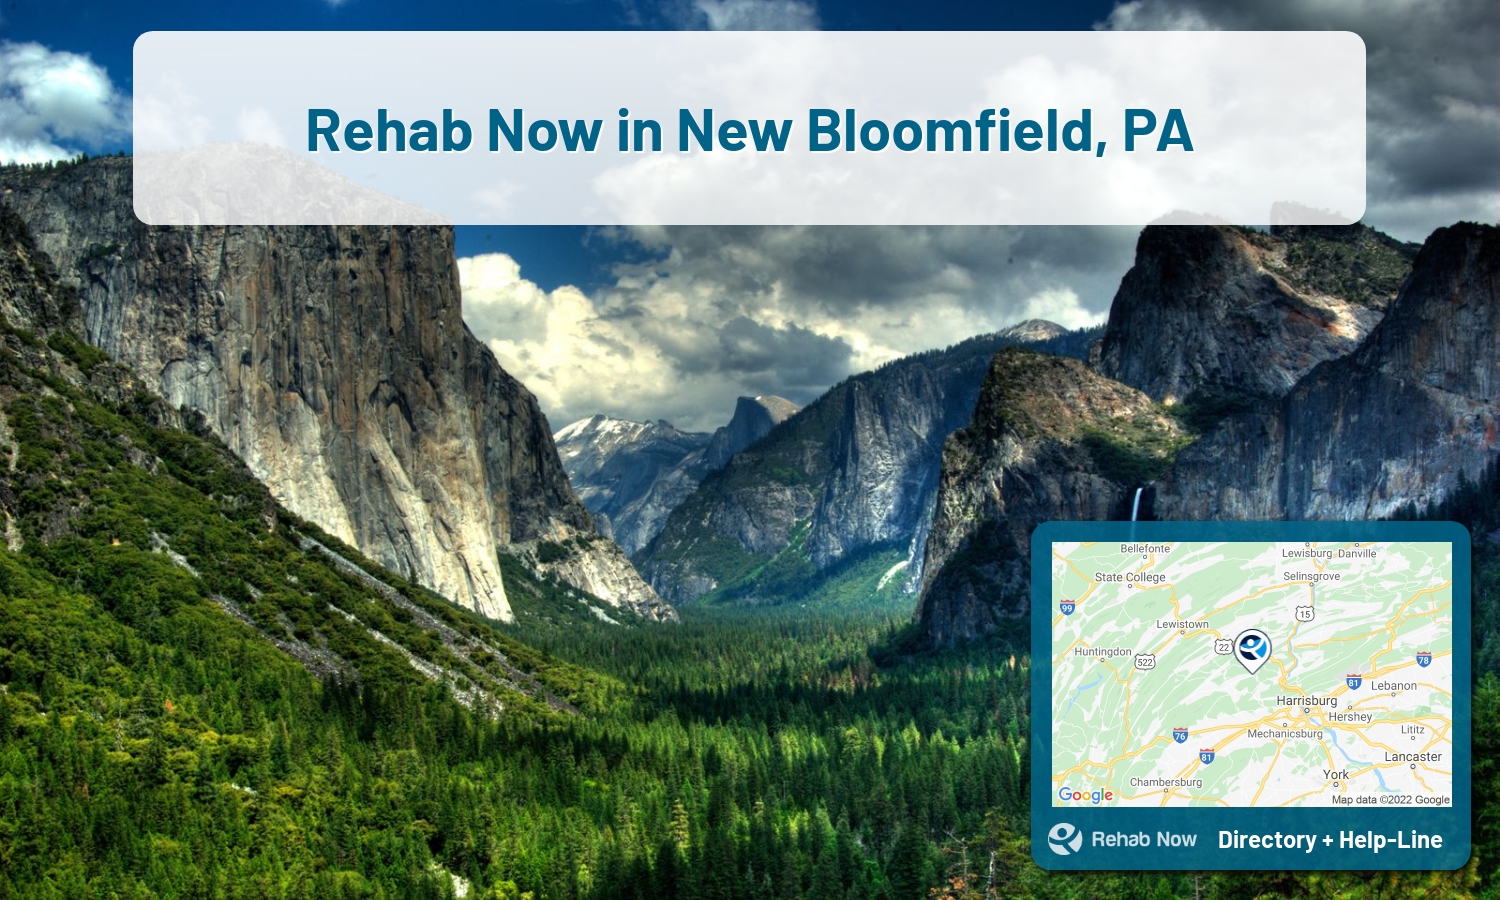 New Bloomfield, PA Treatment Centers. Find drug rehab in New Bloomfield, Pennsylvania, or detox and treatment programs. Get the right help now!